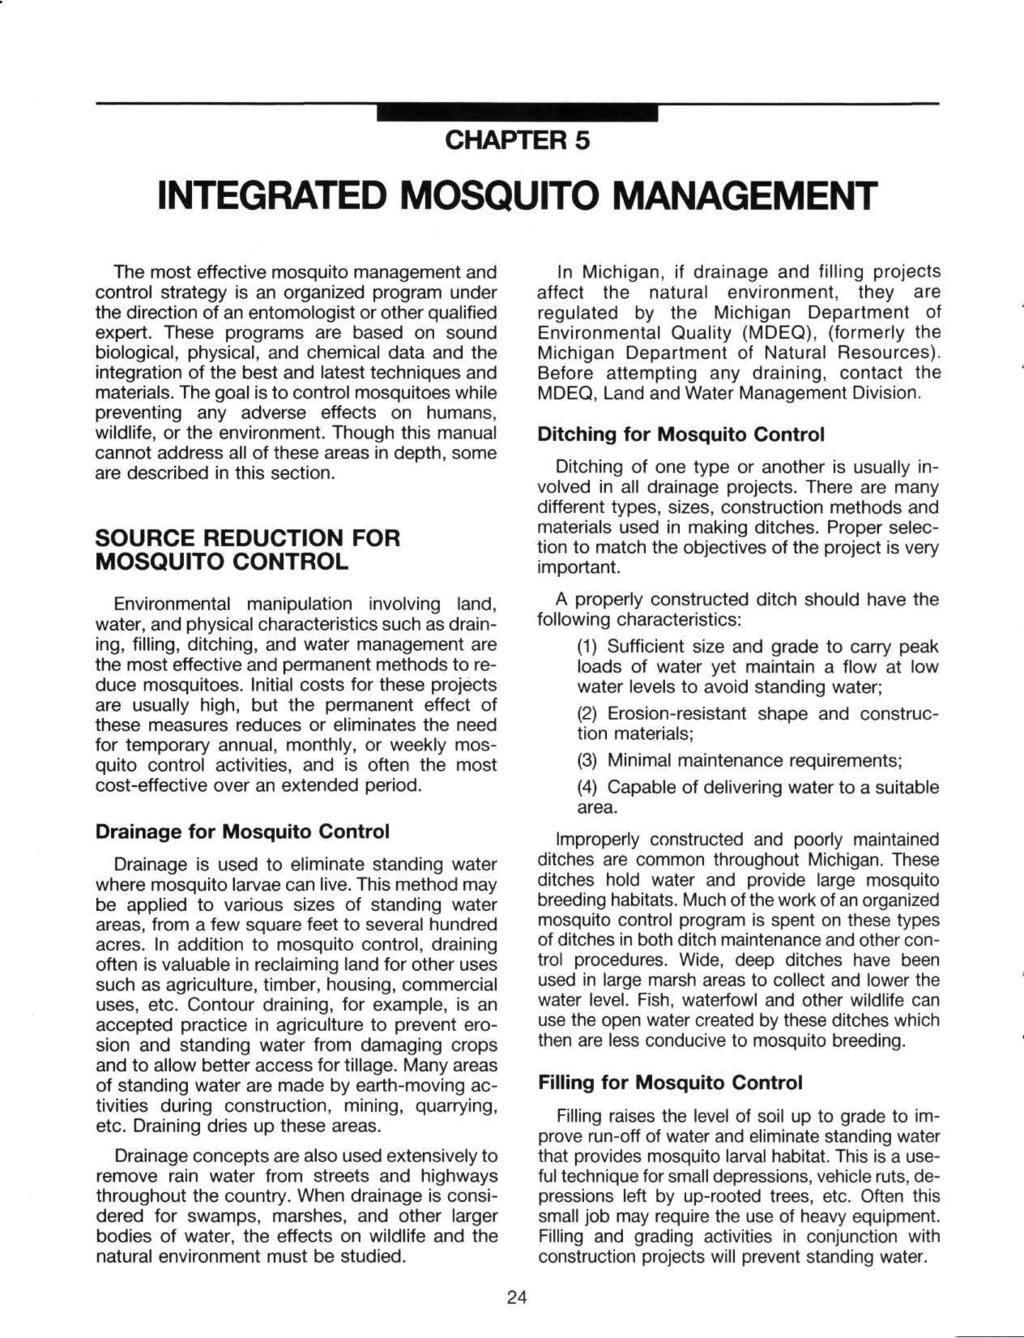 CHAPTER 5 INTEGRATED MOSQUITO MANAGEMENT The most effective mosquito management and control strategy is an organized program under the direction of an entomologist or other qualified expert.